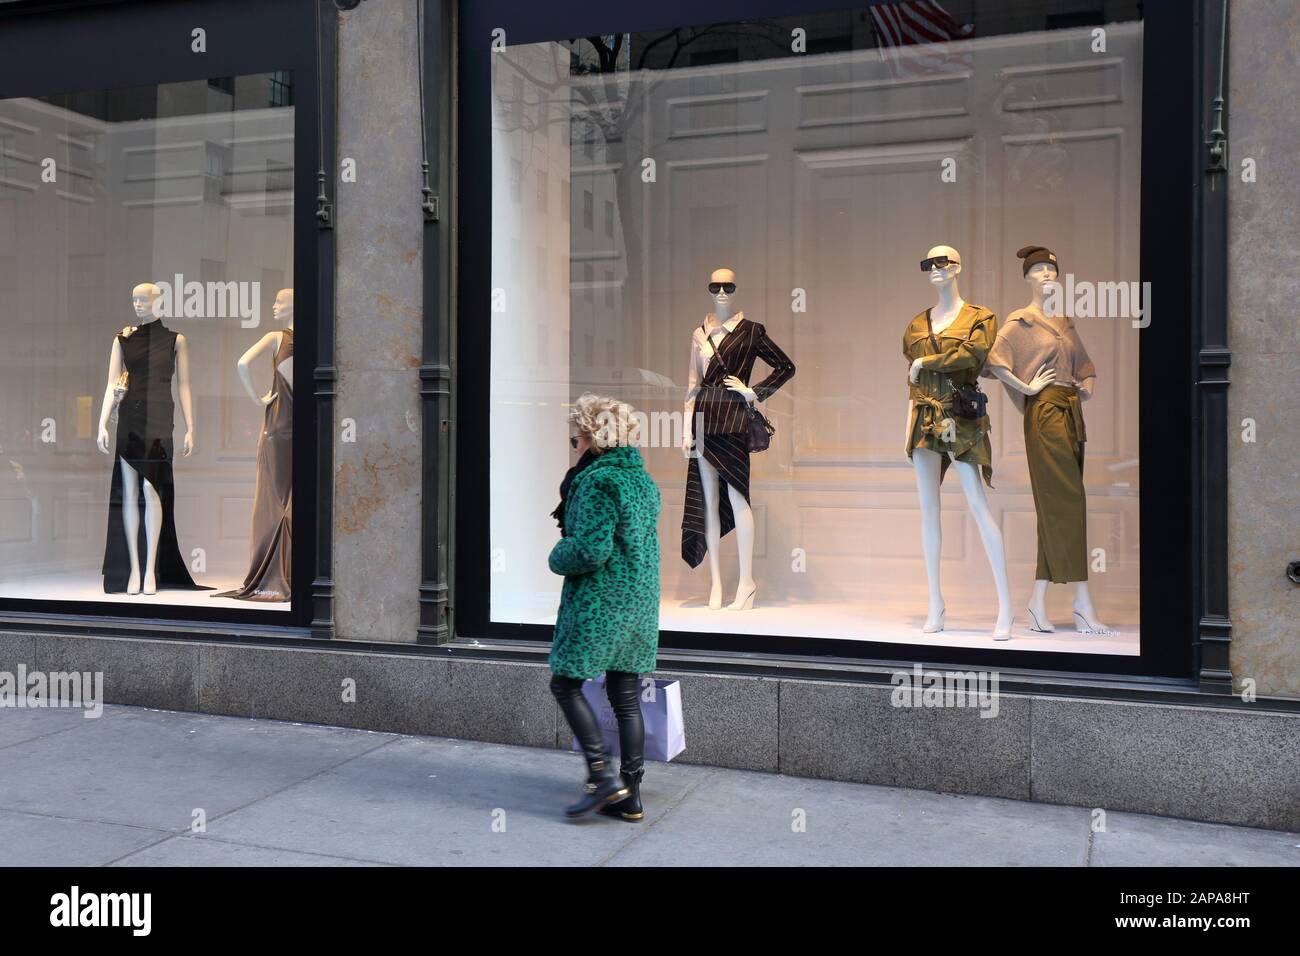 A person with a green leopard print faux fur coat and Bergdorf Goodman shopping bag near the windows of Sak Fifth Avenue (january 21, 2020) Stock Photo